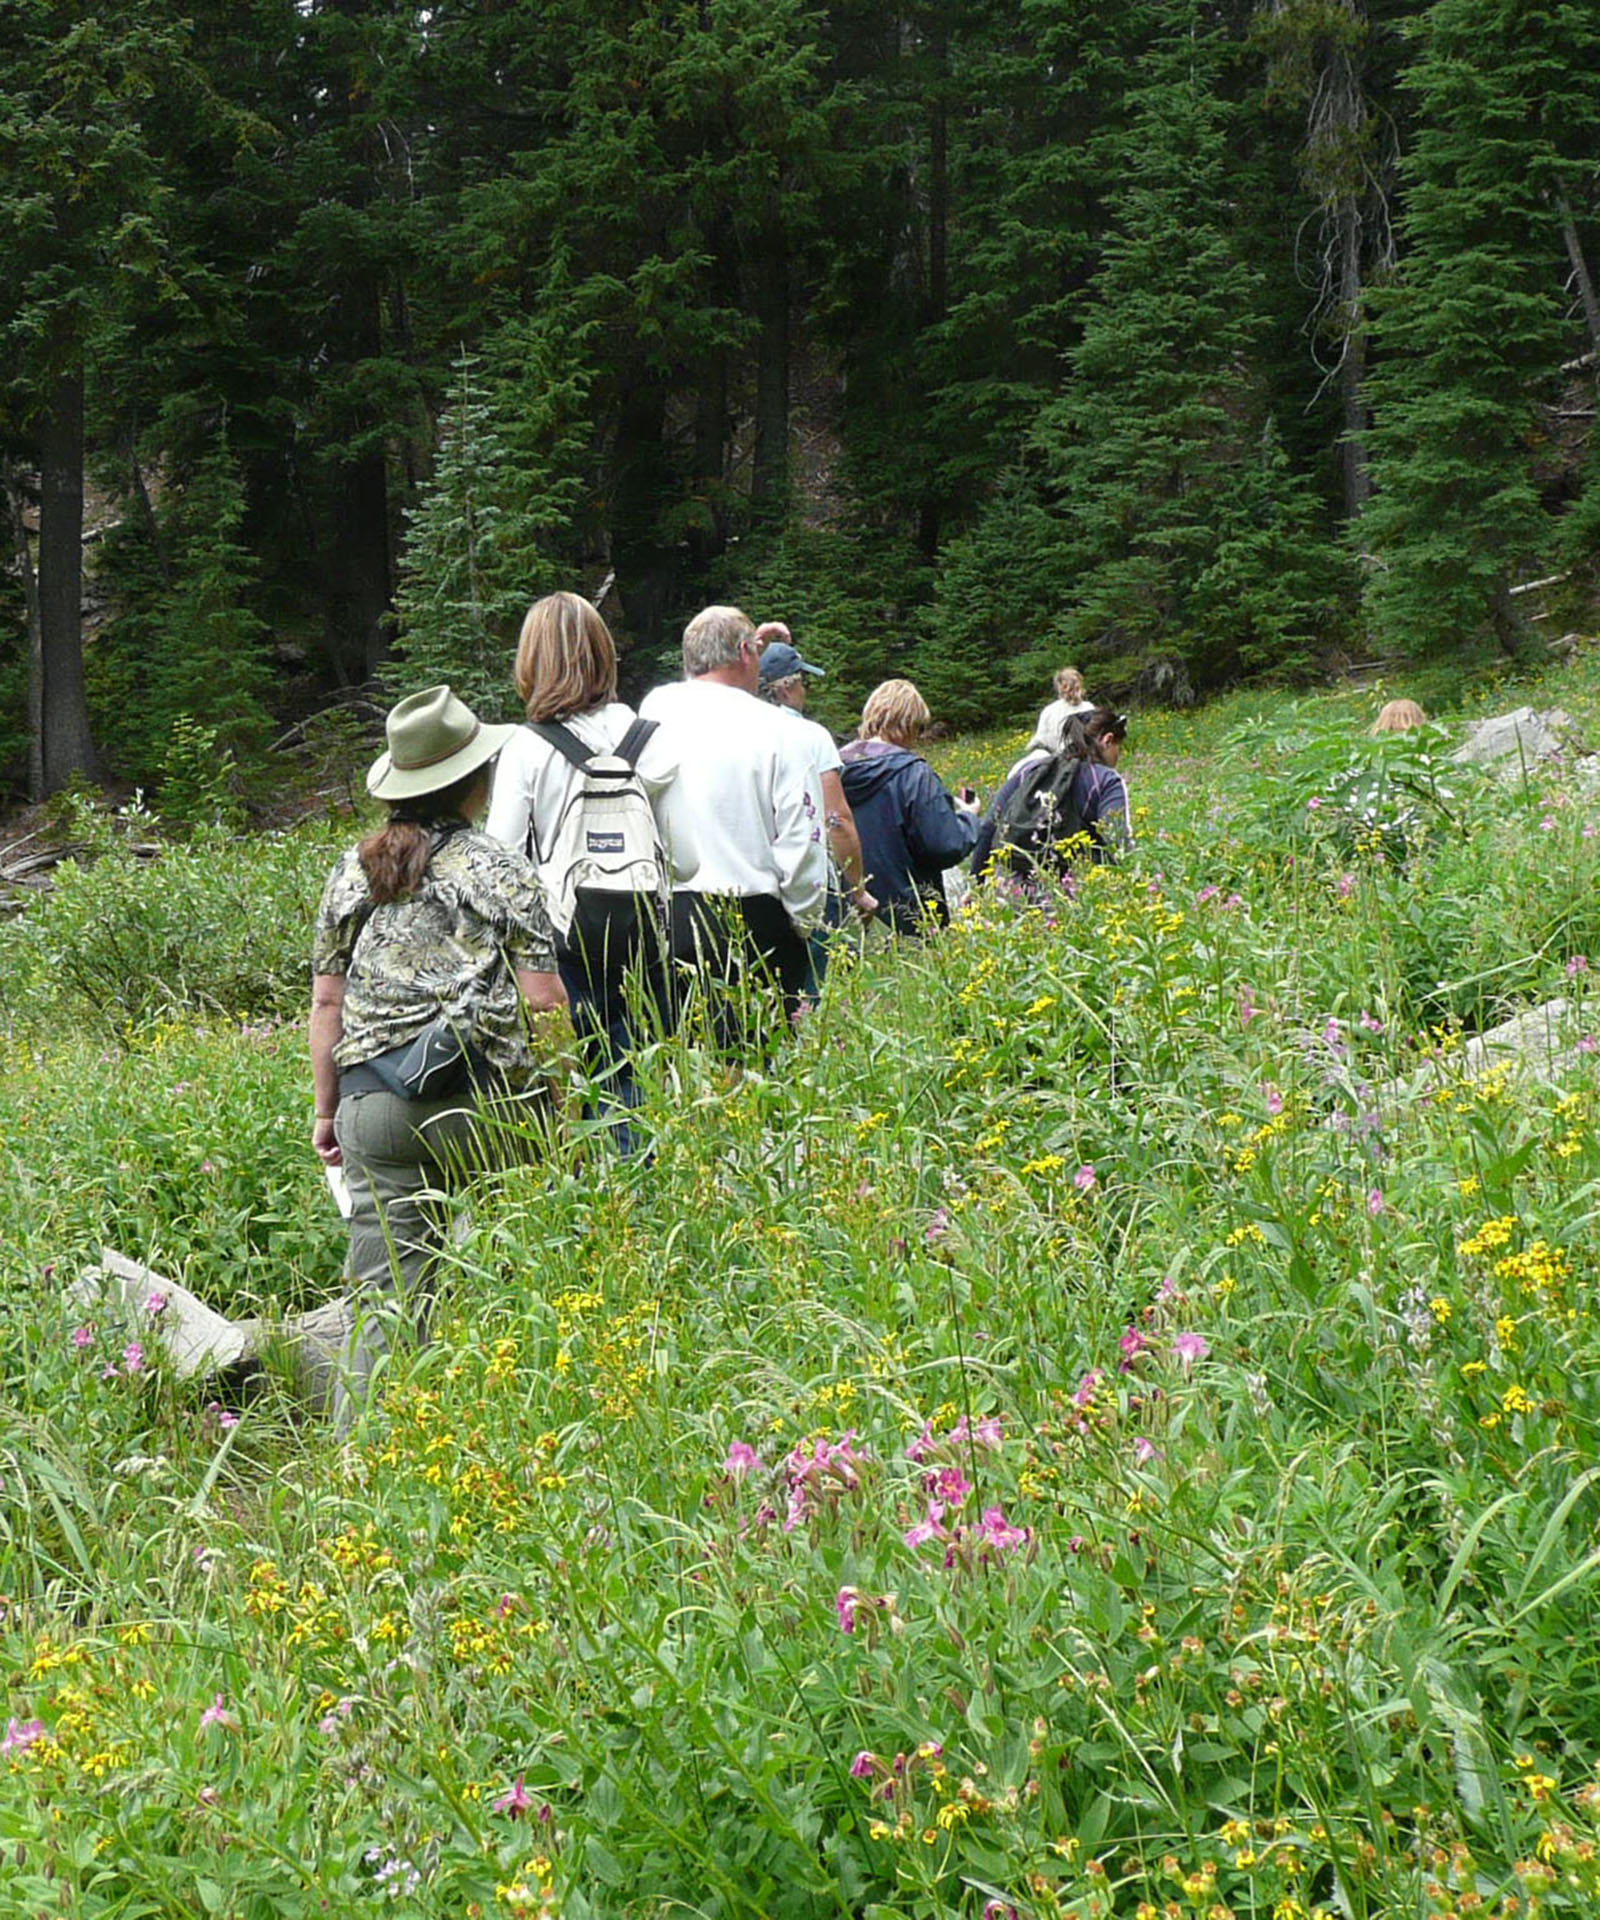 A line of hikers walk along a trail through waist-deep green grasses and yellow and pink flowers.